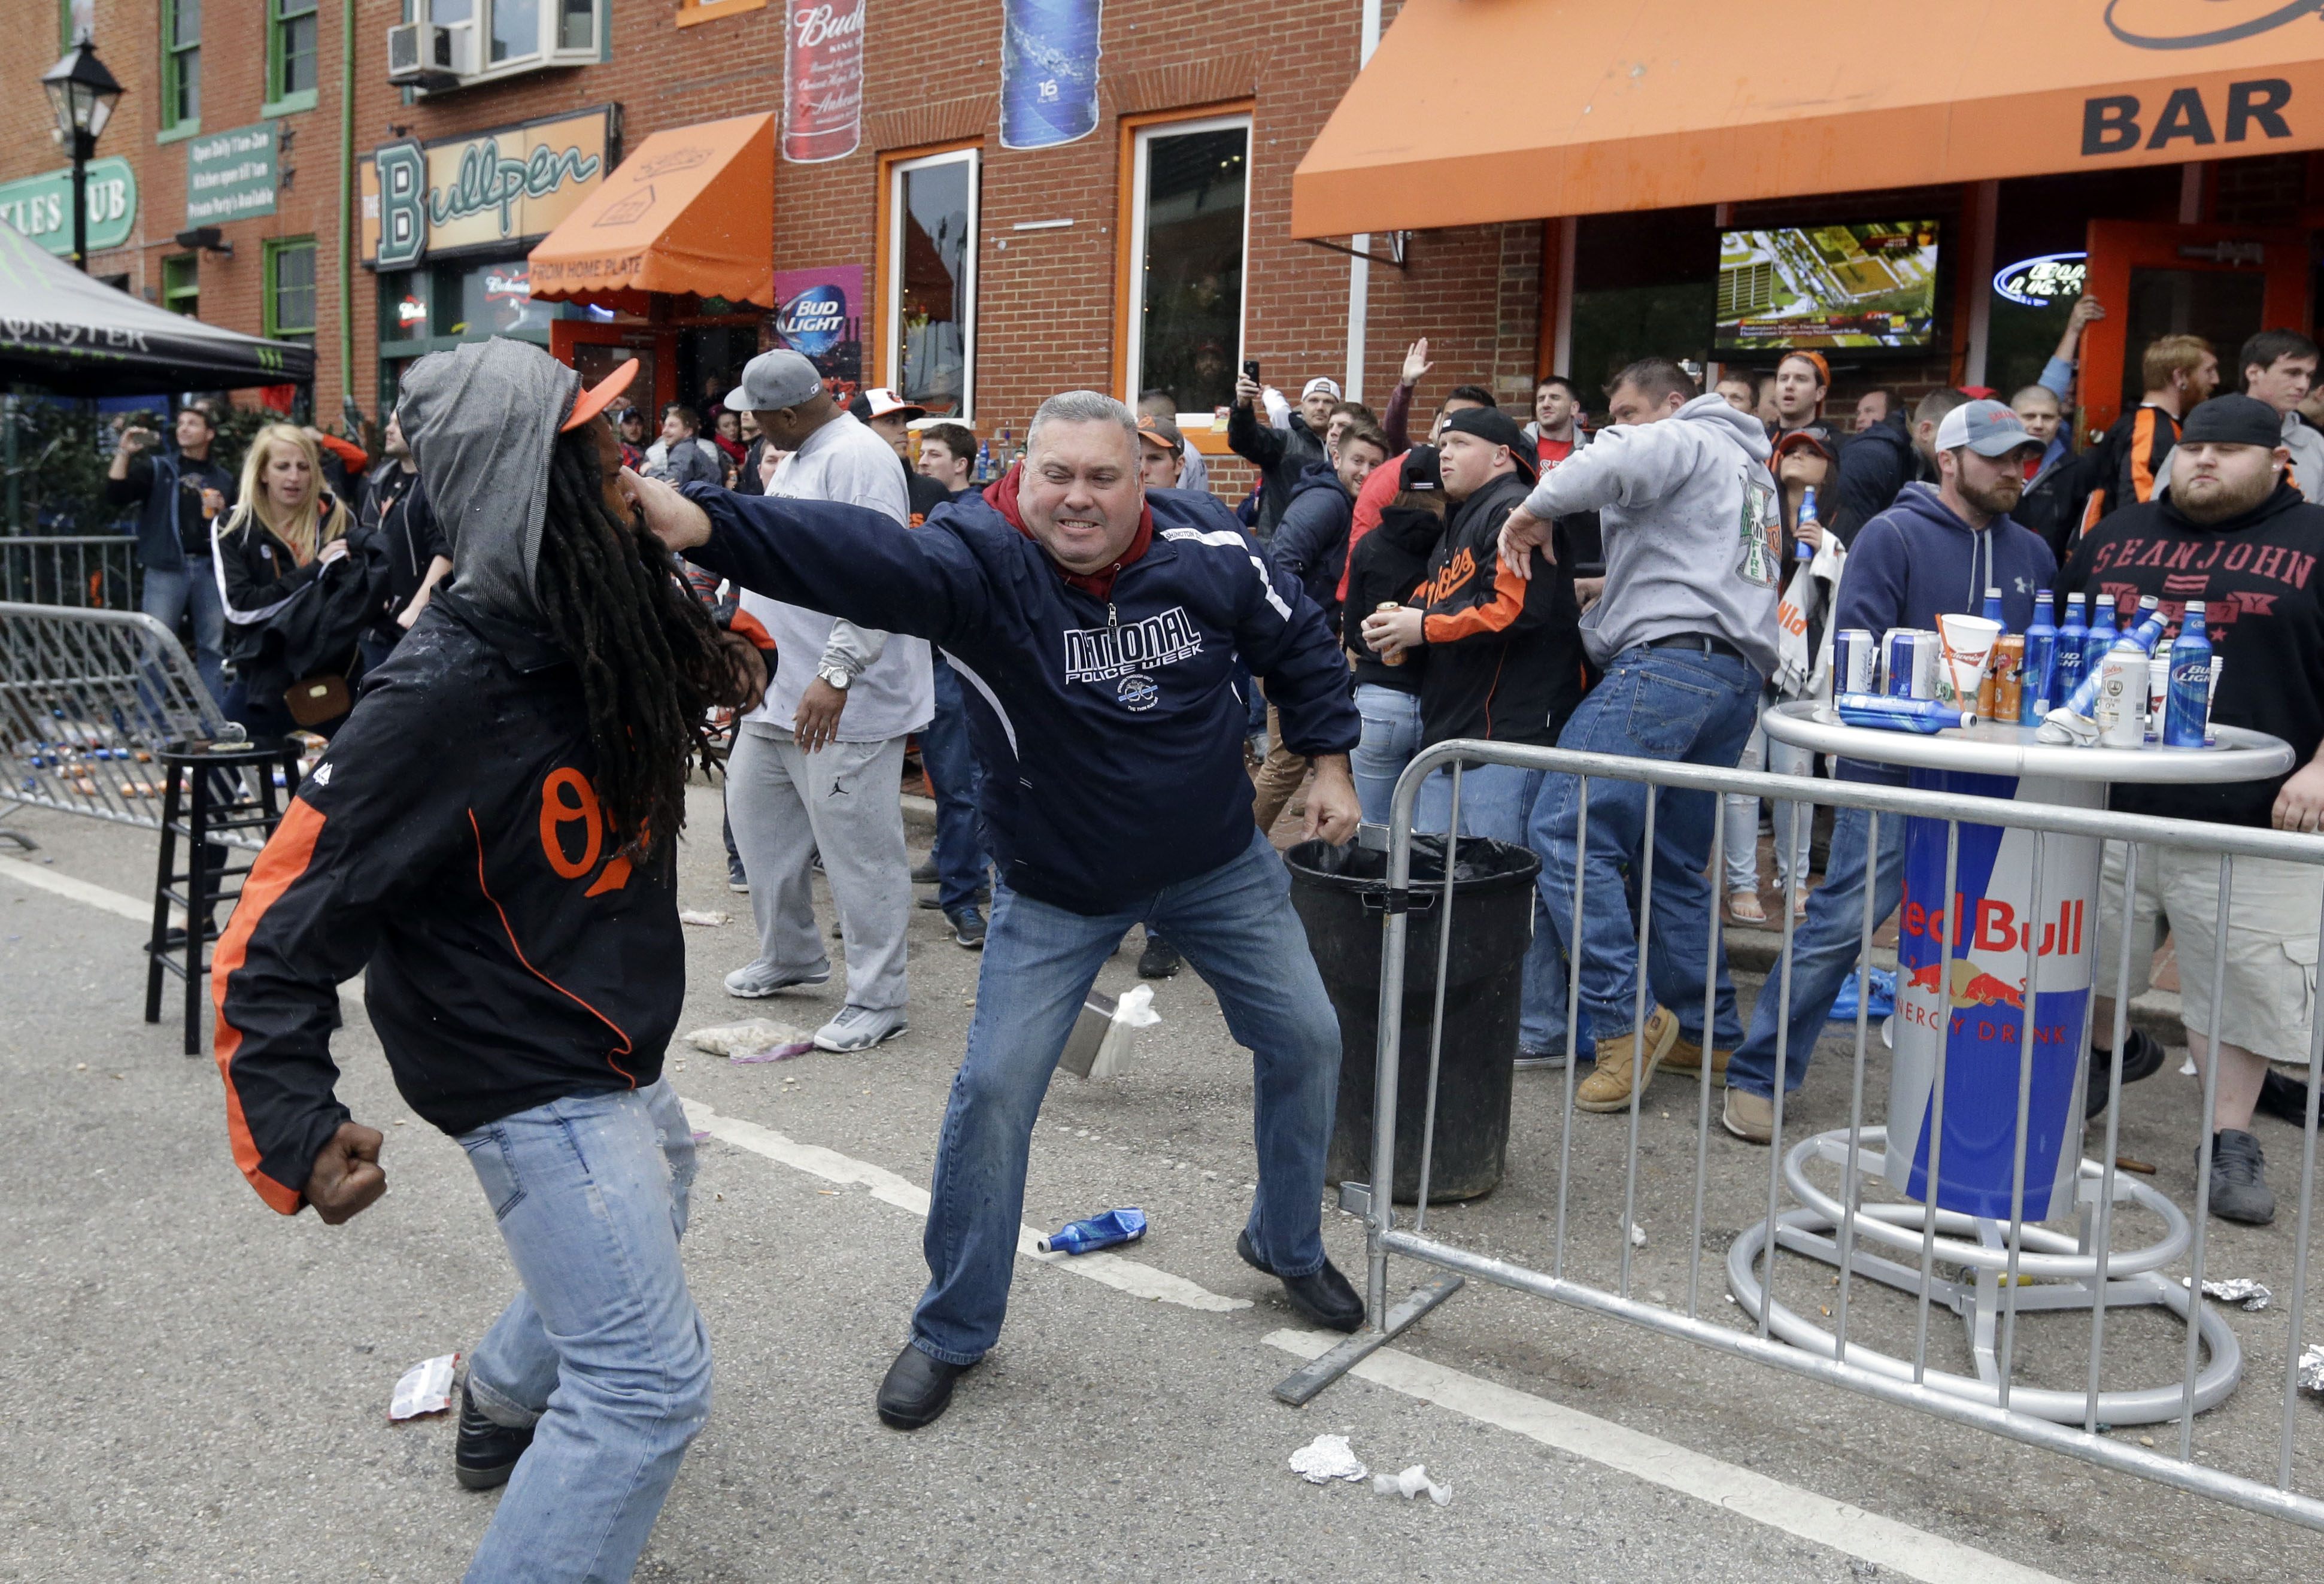 BALTIMORE, Maryland — Racial protests supposed to be peaceful quickly turne...